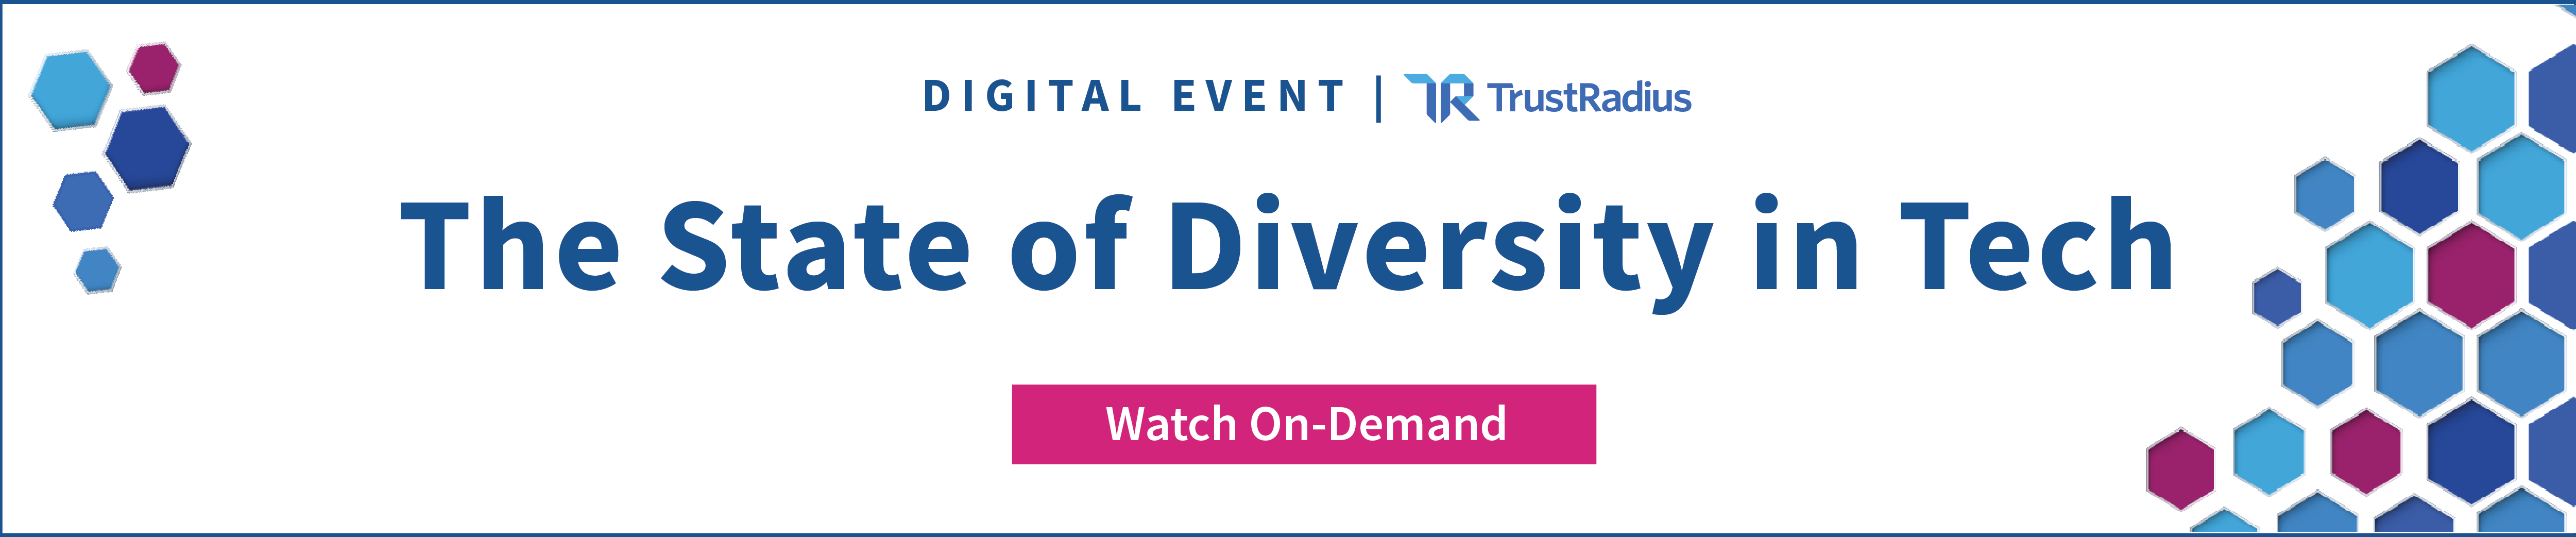 Image sharing information about how to watch or listen to the State of Diversity in Tech webinar hosted by TrustRadius, clicking on the image takes one to the on-demand link